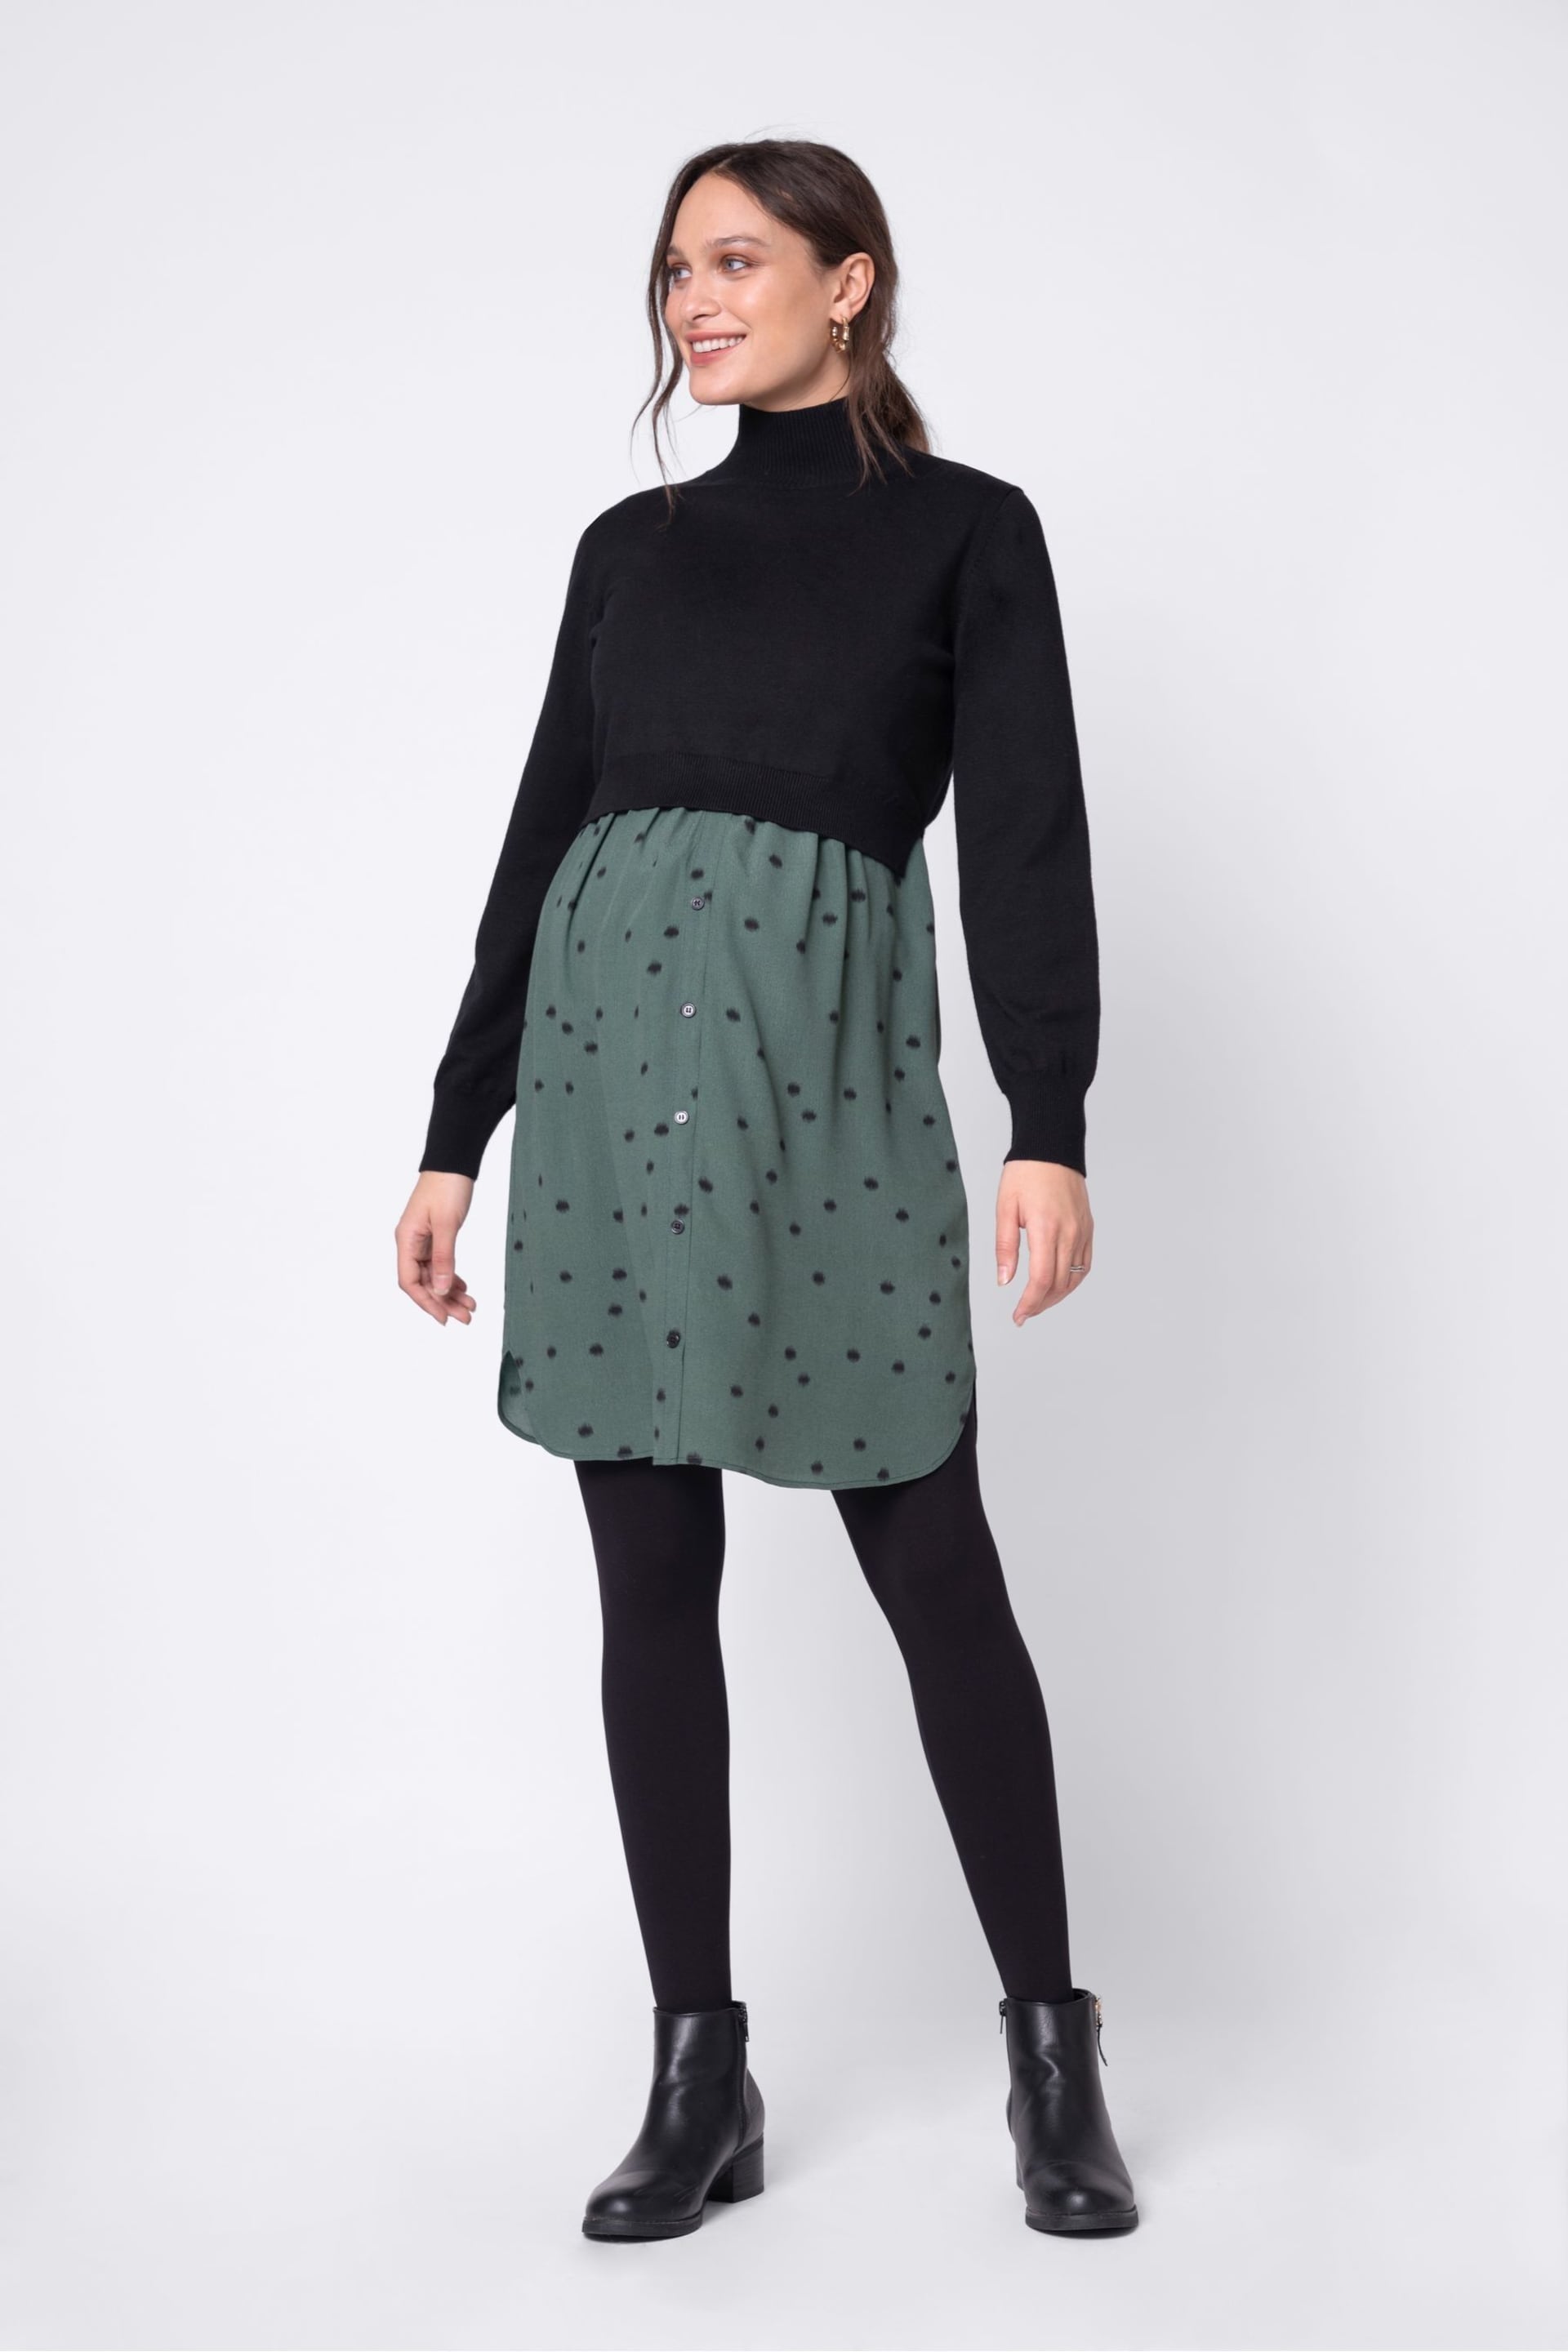 Seraphine Roll Neck Black Maternity And Nursing Jumper With Woven Skirt - Image 3 of 5